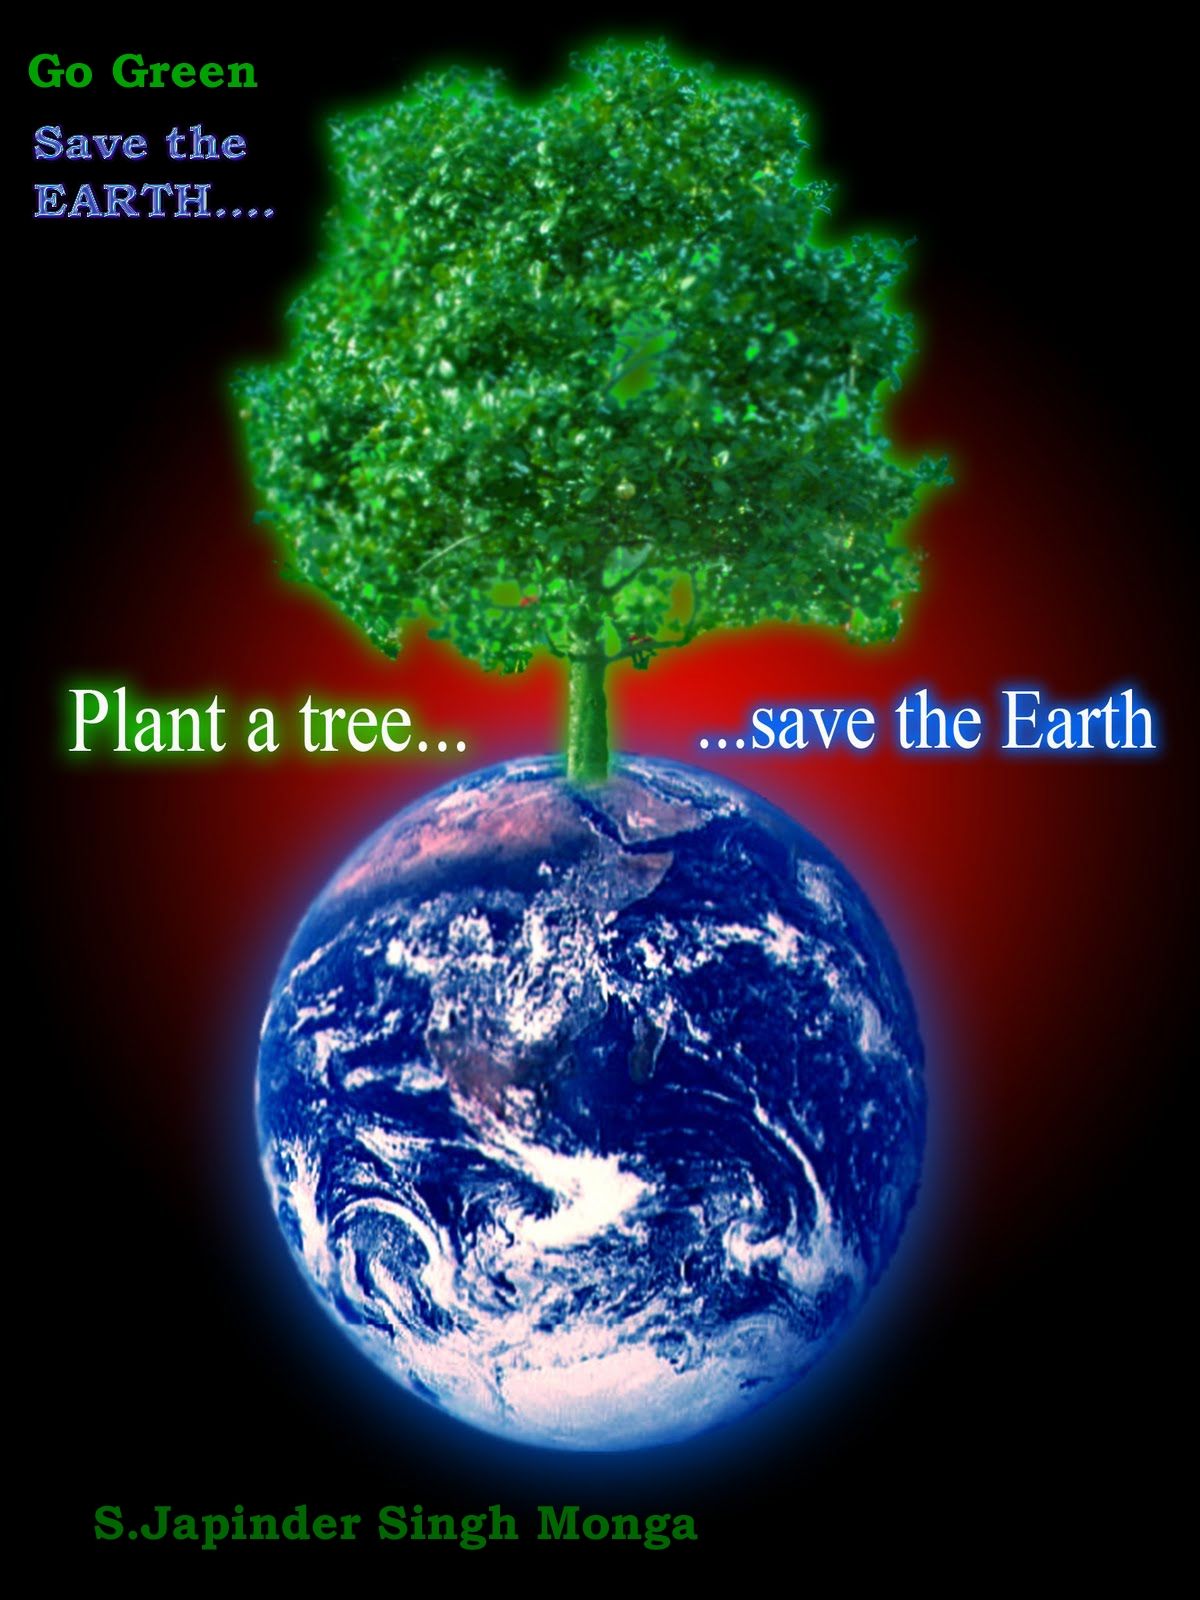 Save Our Earth Quotes. QuotesGram